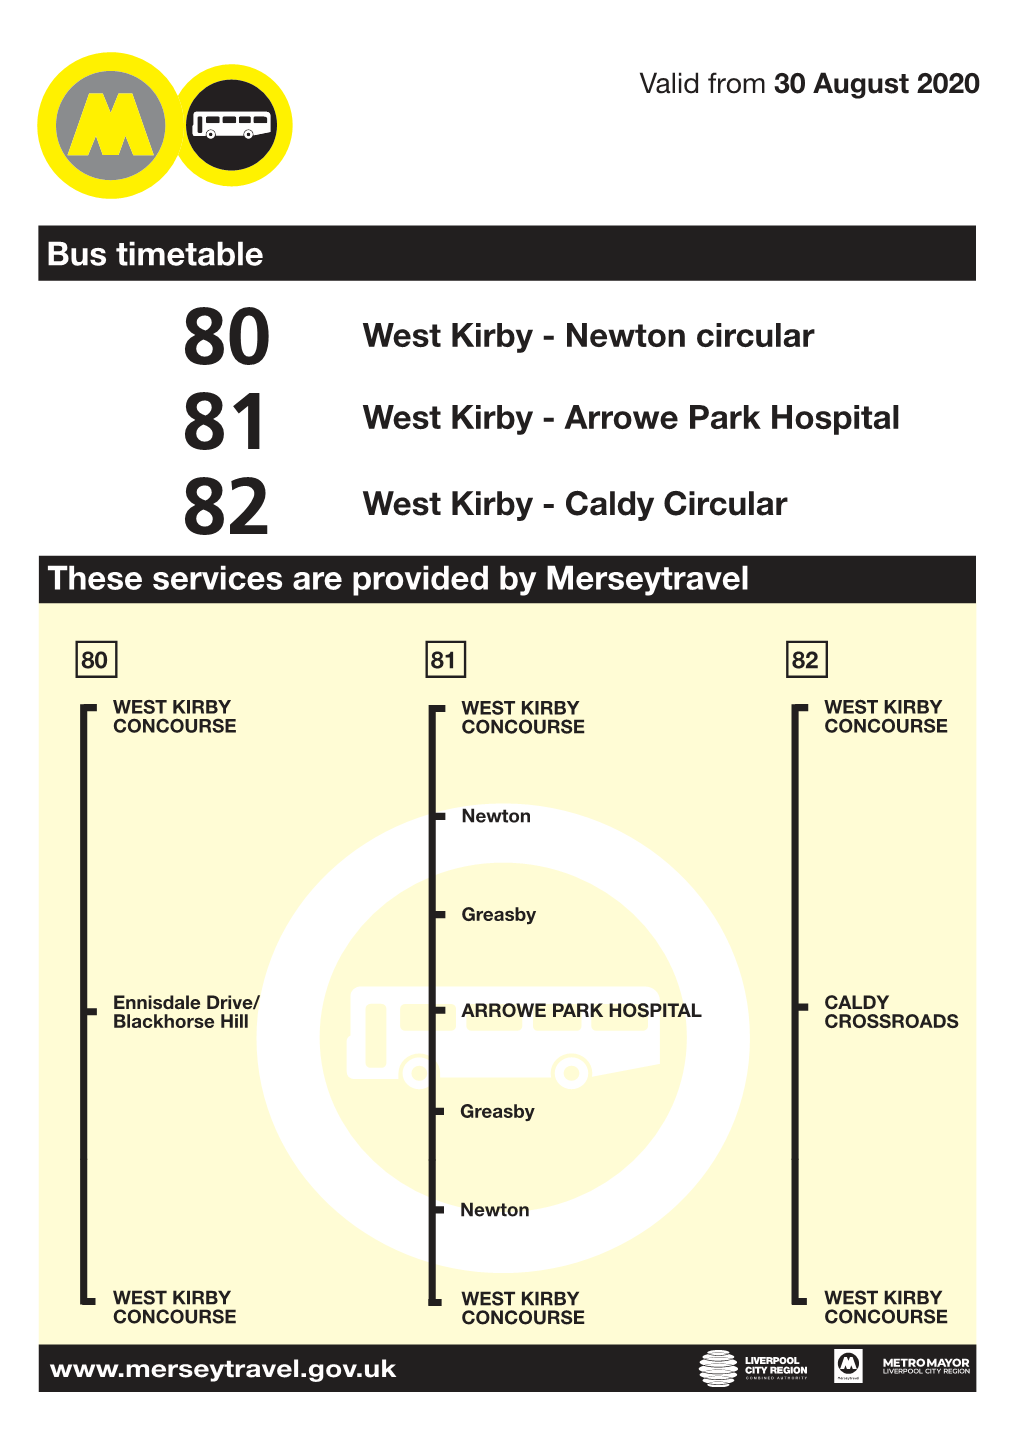 81 West Kirby - Arrowe Park Hospital 82 West Kirby - Caldy Circular These Services Are Provided by Merseytravel